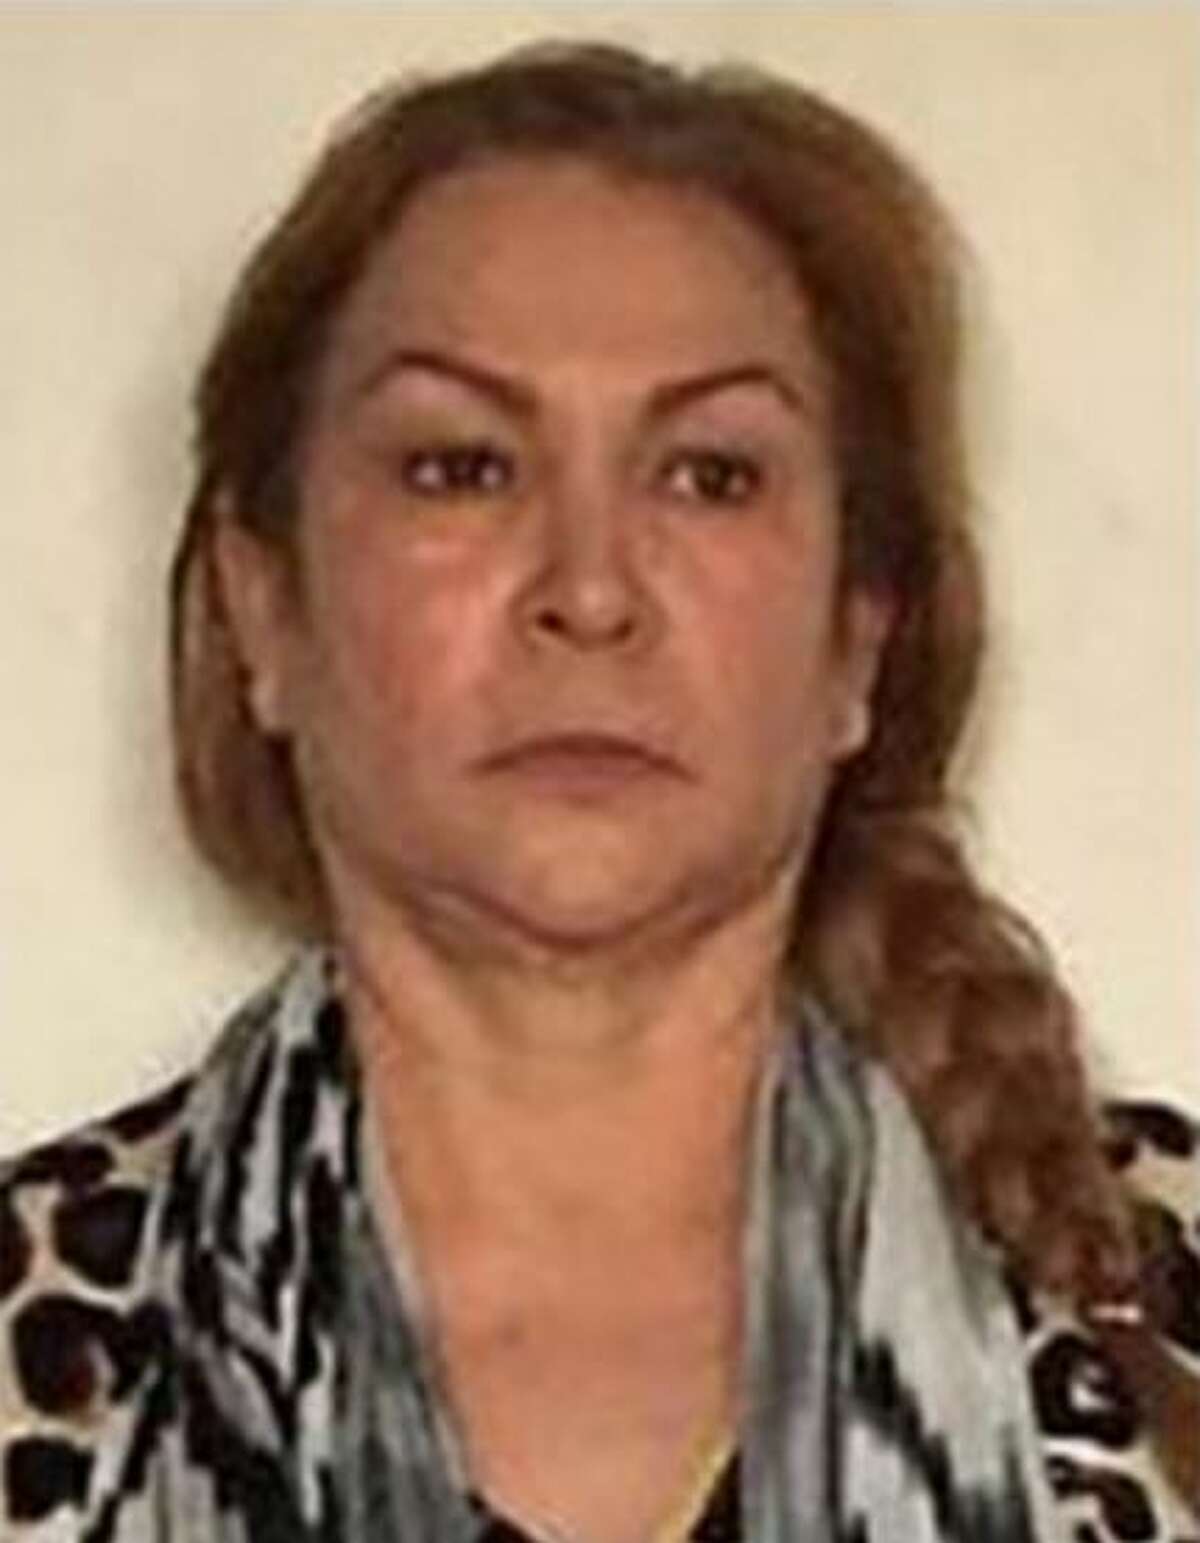 Mexican authorities announced the capture of Guadalupe Fernandez Valencia, 55, on Tuesday. Valenica, also known as "La Patrona," is accused of trafficking drugs and money for the Sinaloa cartel, headed by Joaquín "El Chapo" Guzmán.